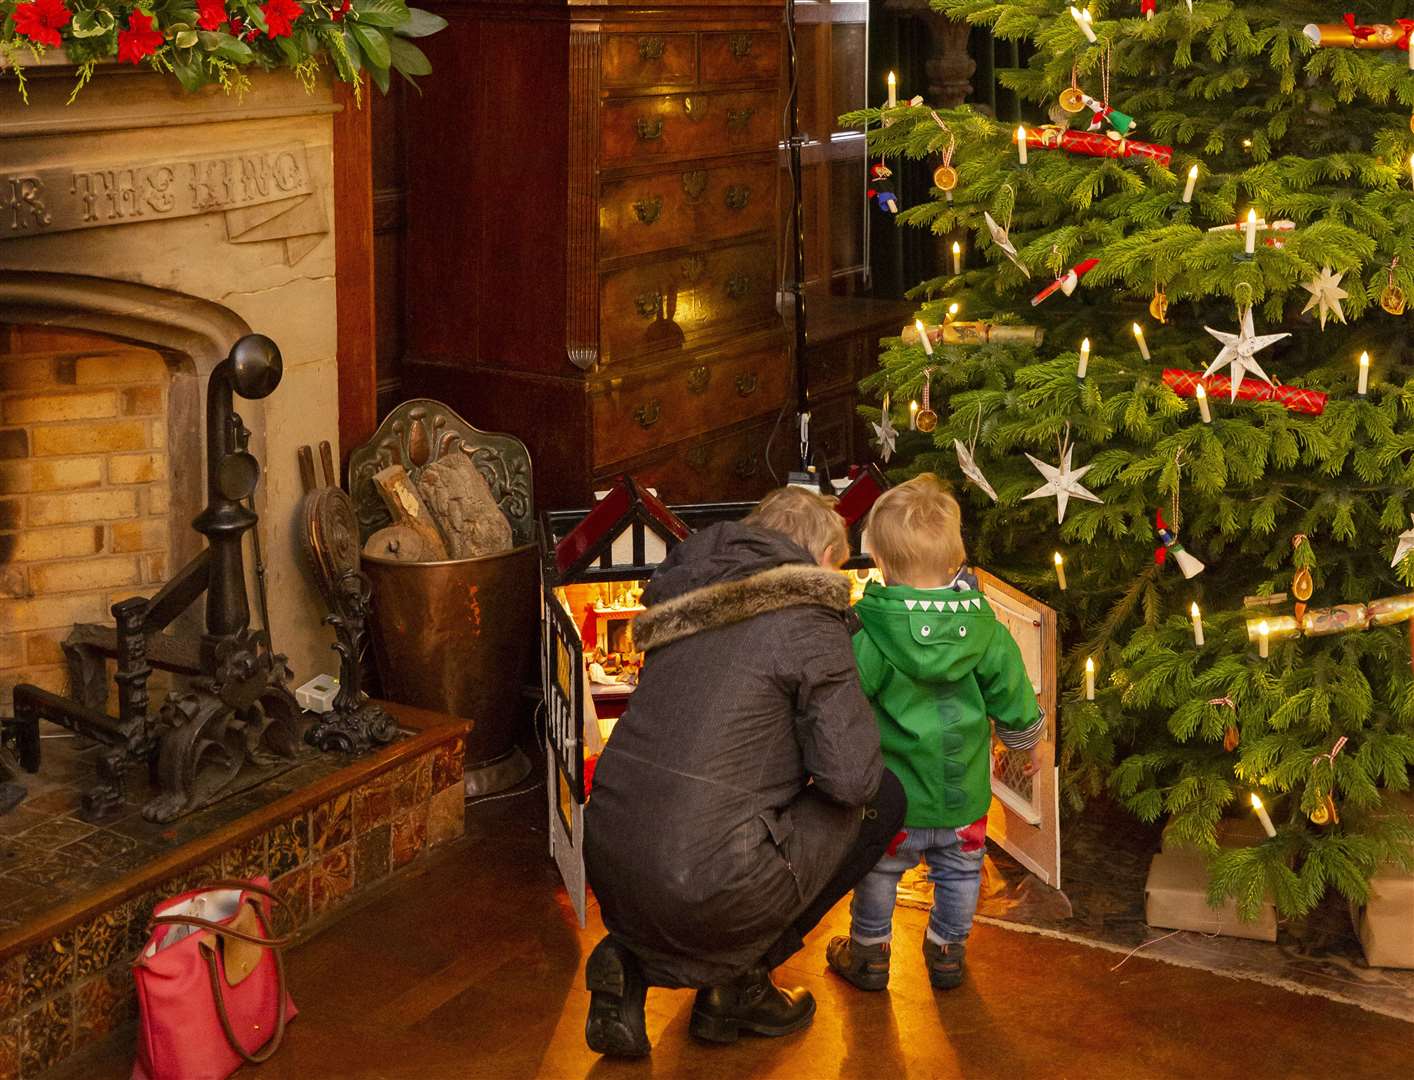 Visitors can explore the grand castle with its Christmas decorations. Picture: © National Trust Images Chris Lacey